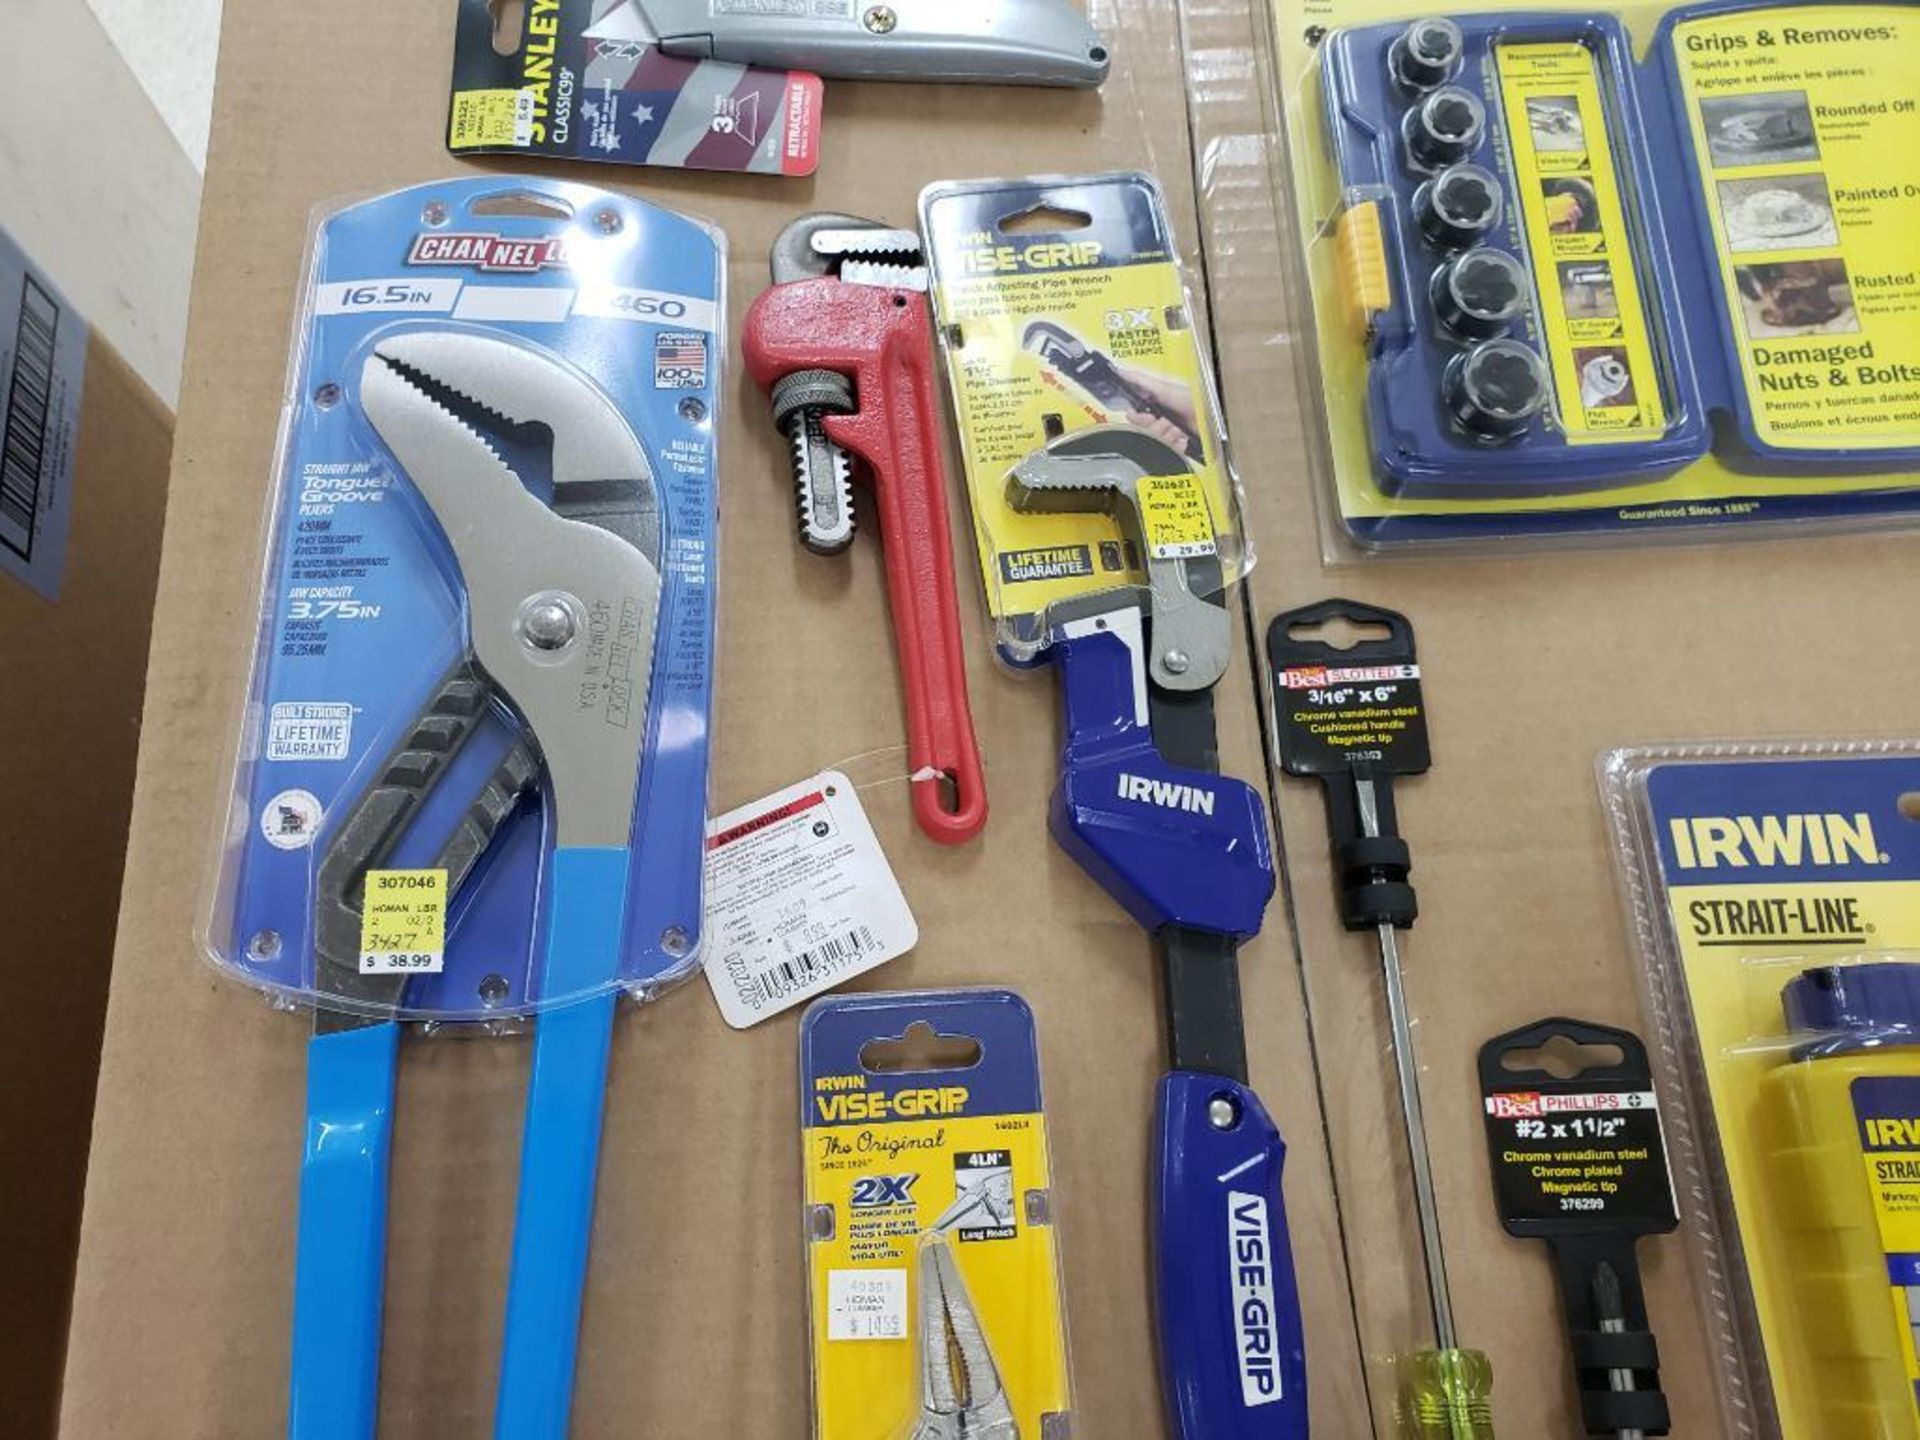 Large assortment of tools. New as pictured. - Image 7 of 7